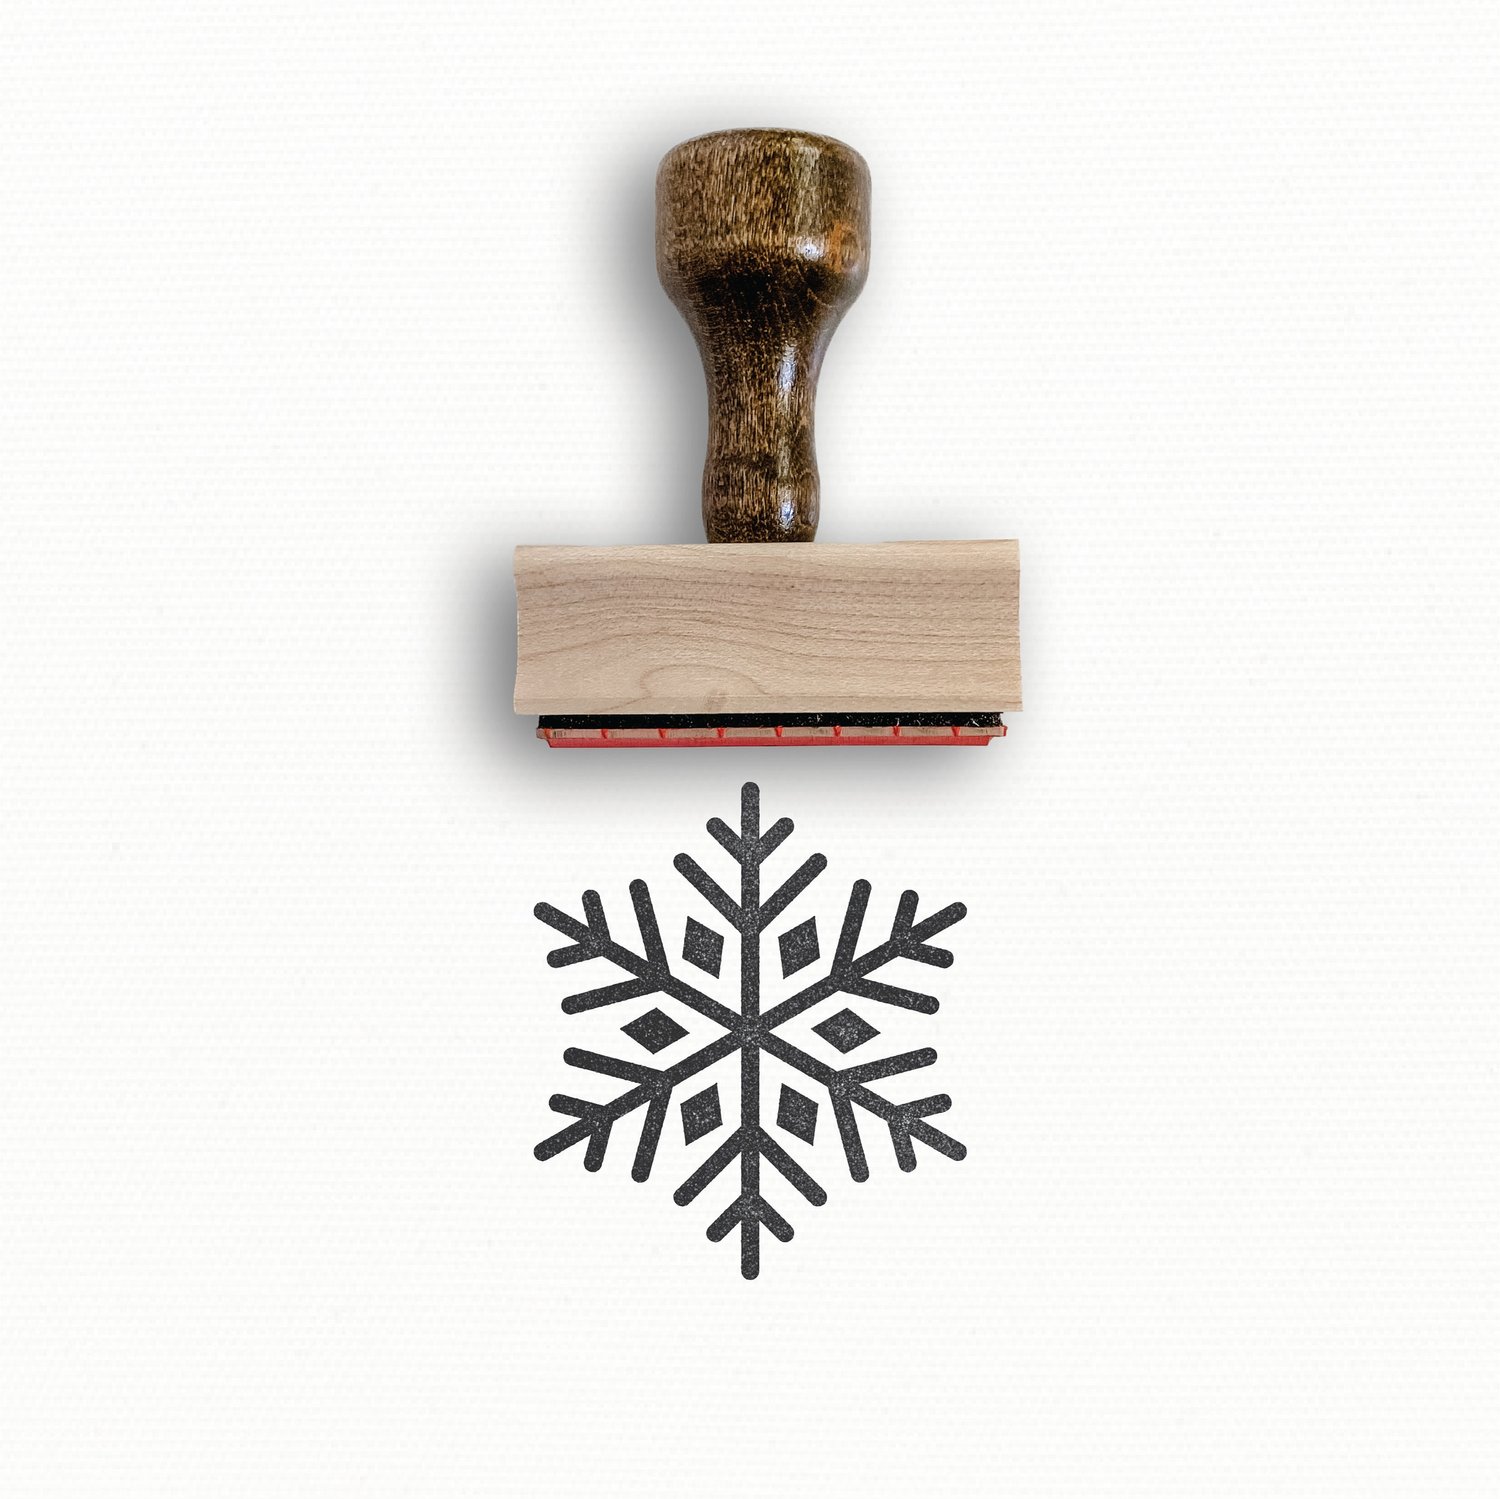 Snowflake hand carved rubber stamp / christmas stamps / snowflakes stamp/  stamp set/ diy christmas decor